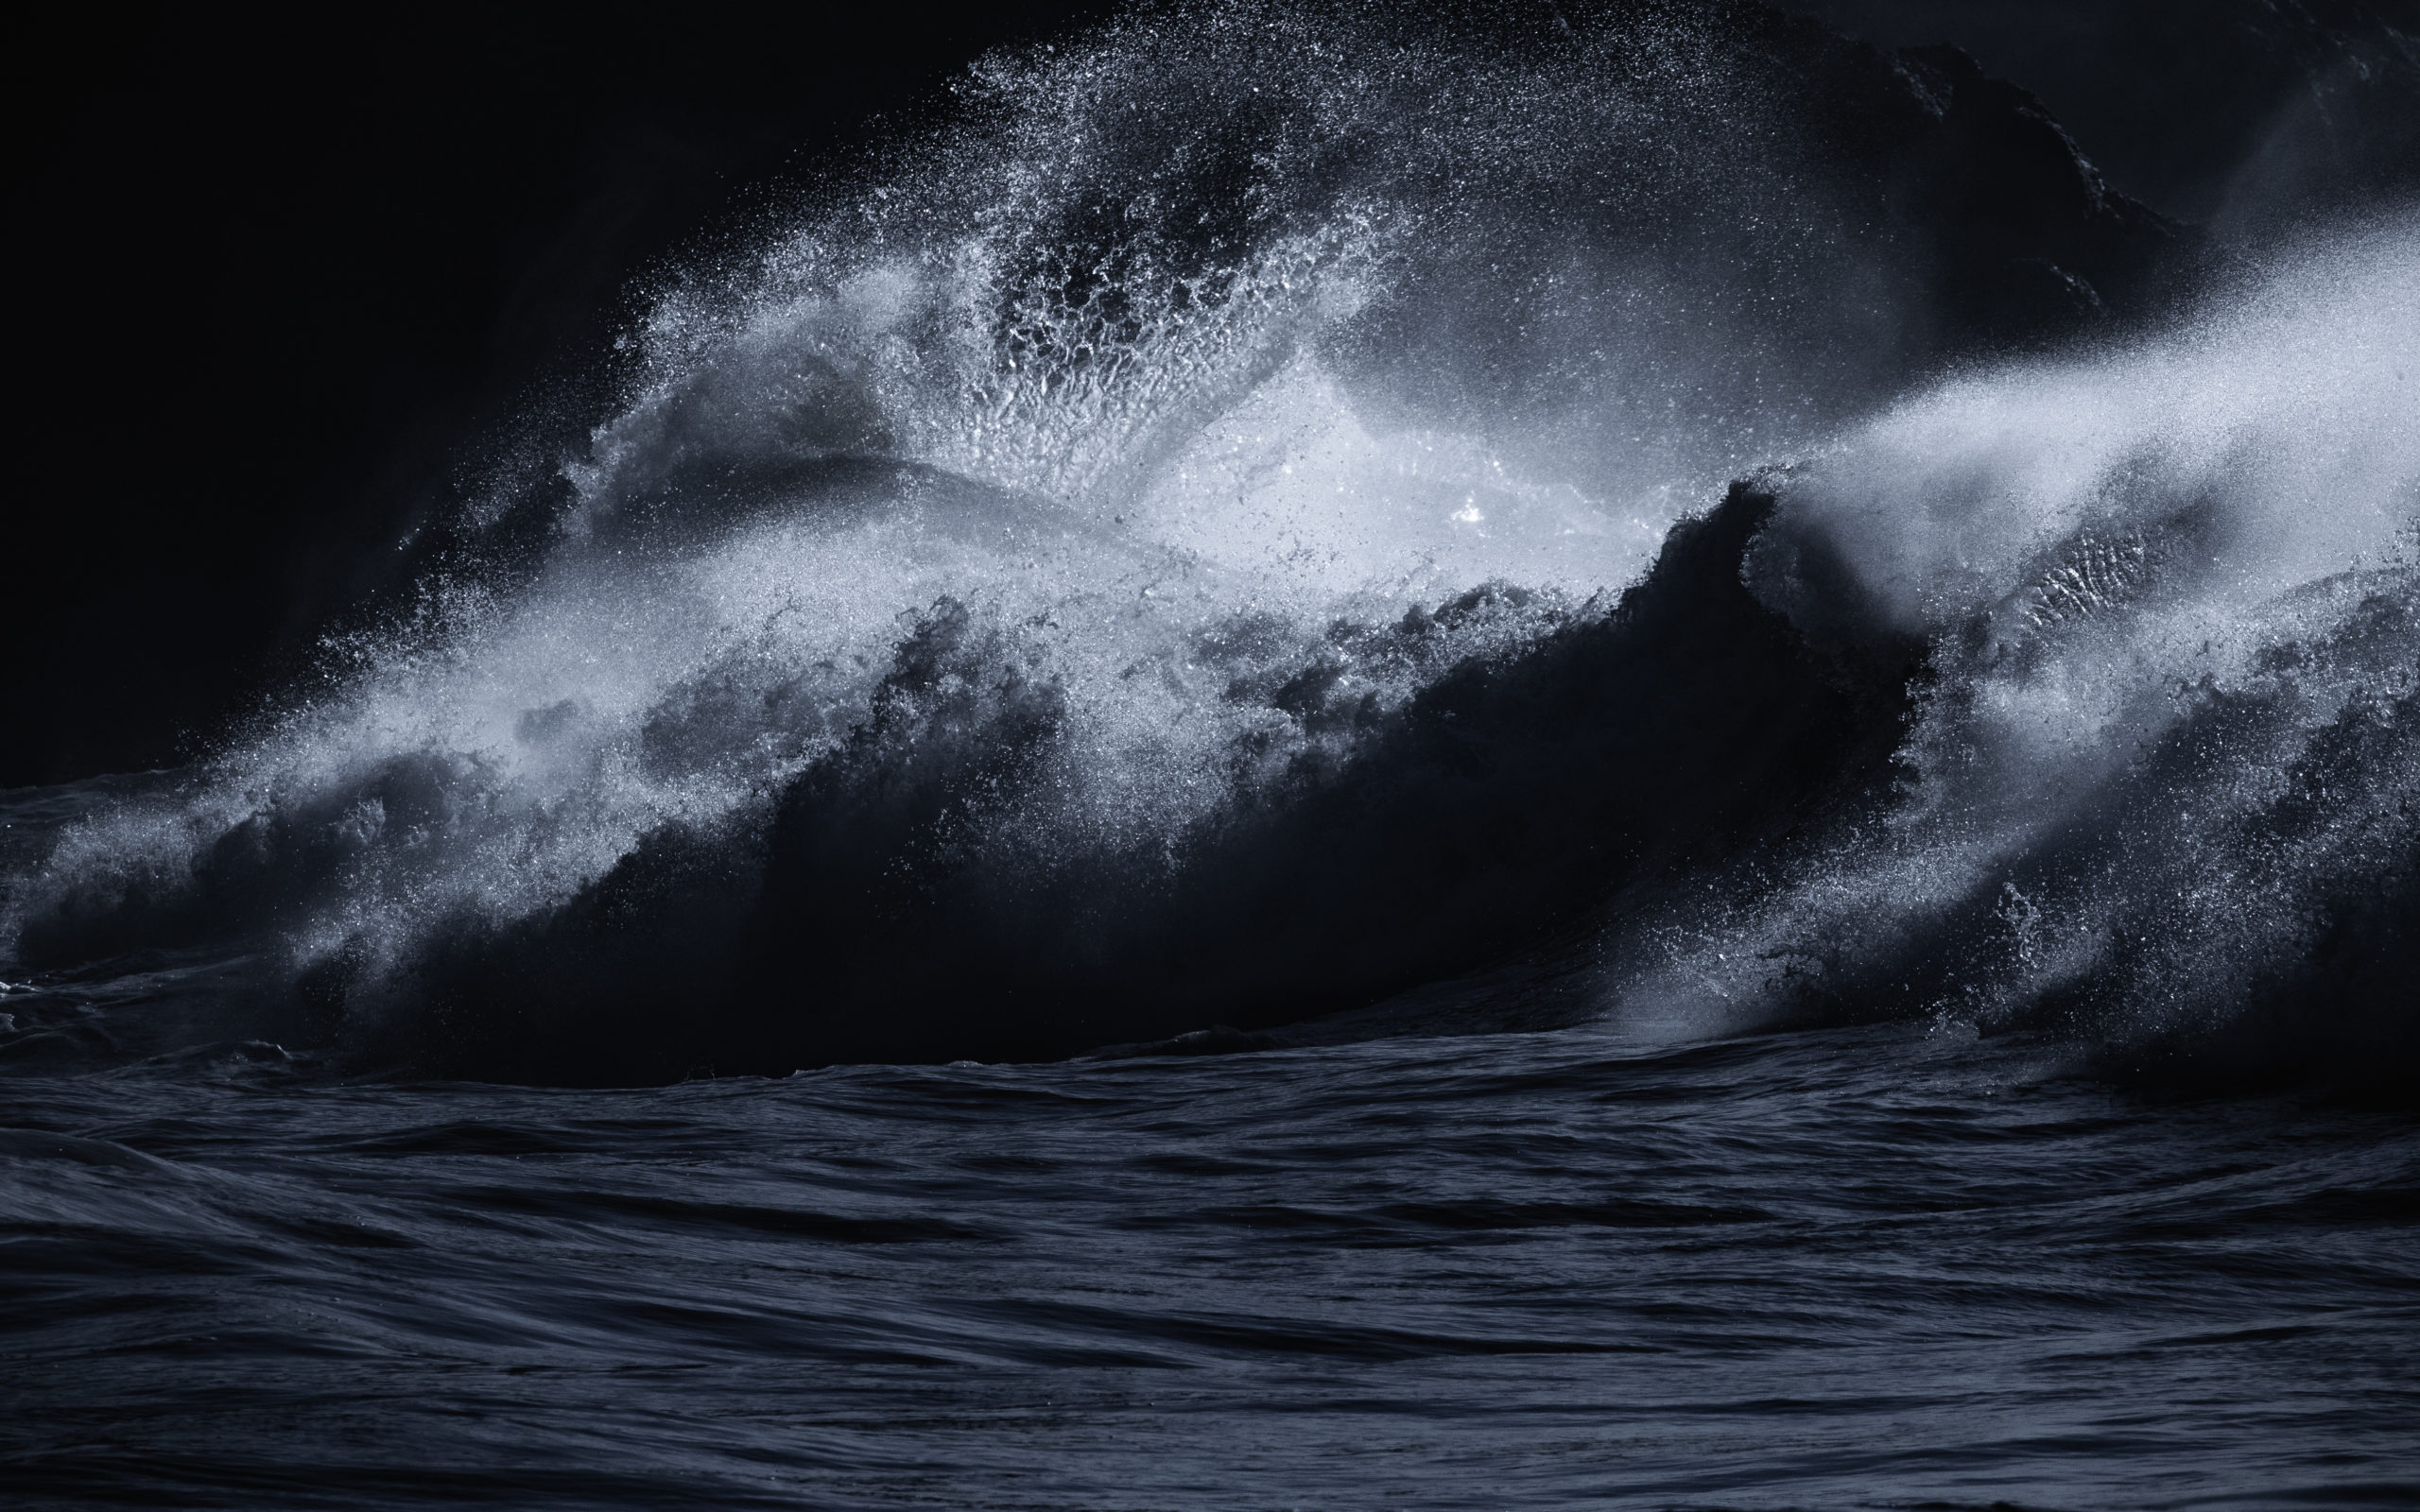 Dramatic Wave photography shot at Cape Disappointment state park in Washington.